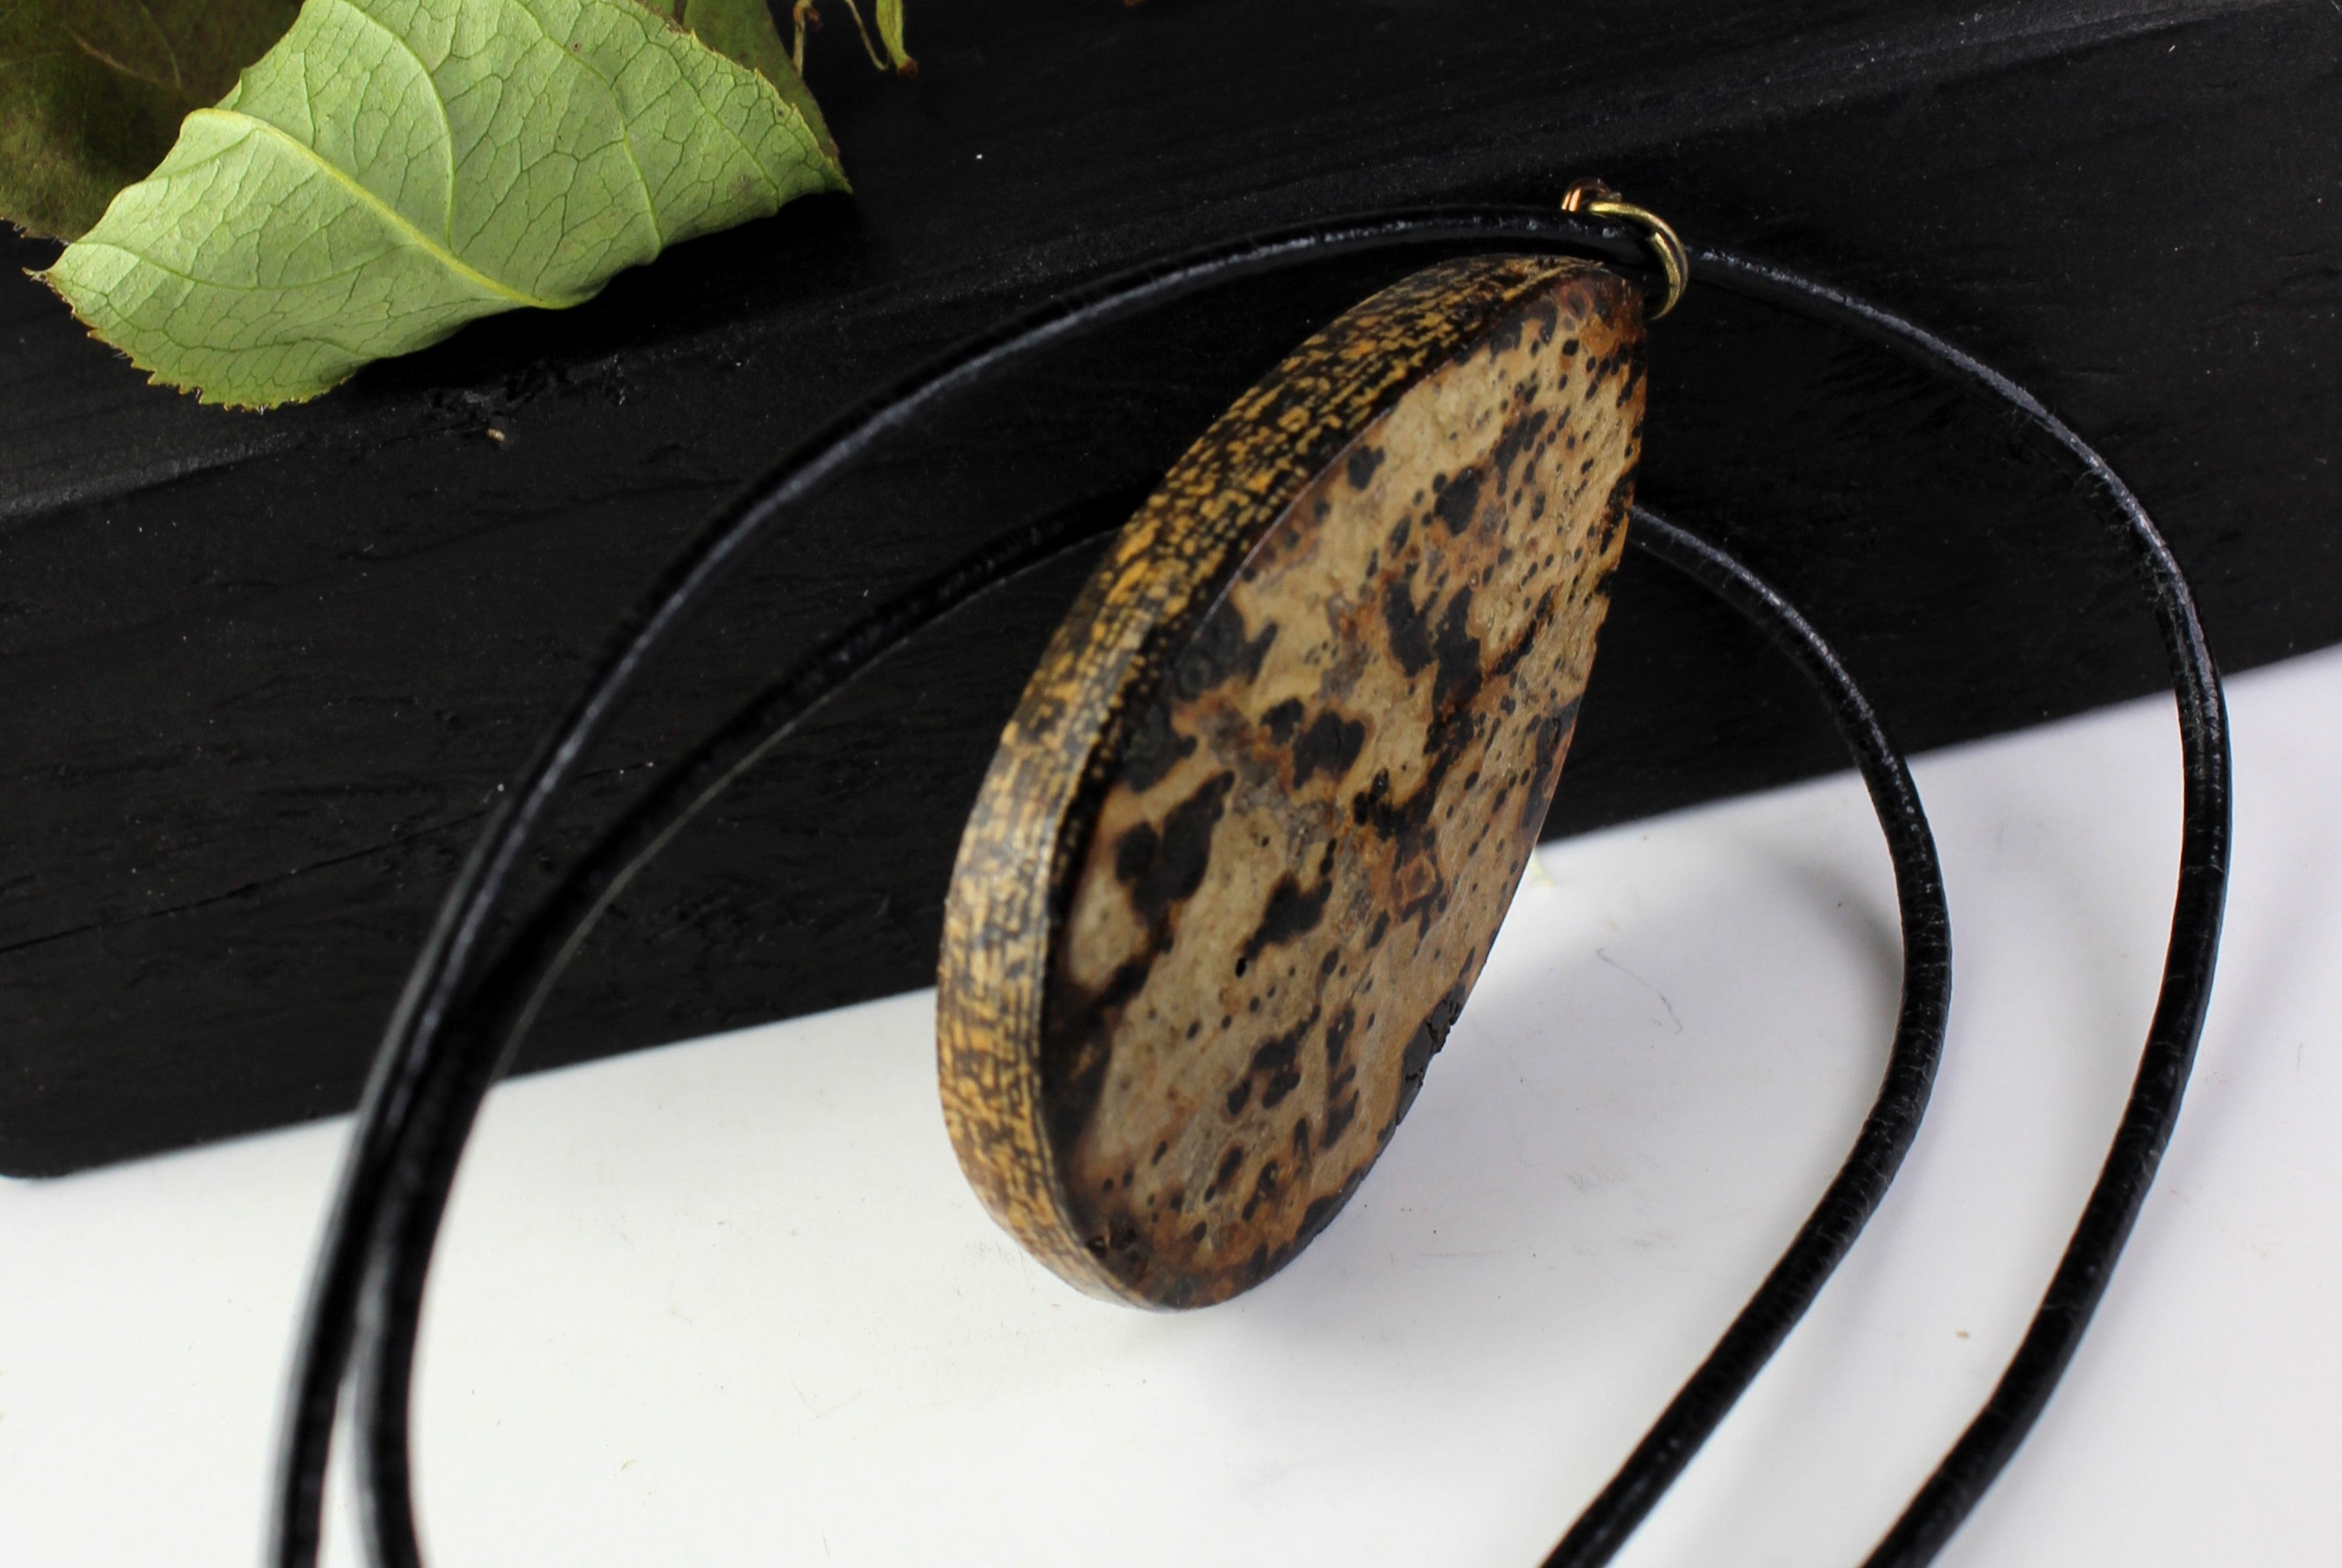 Pearly aspen bark necklace